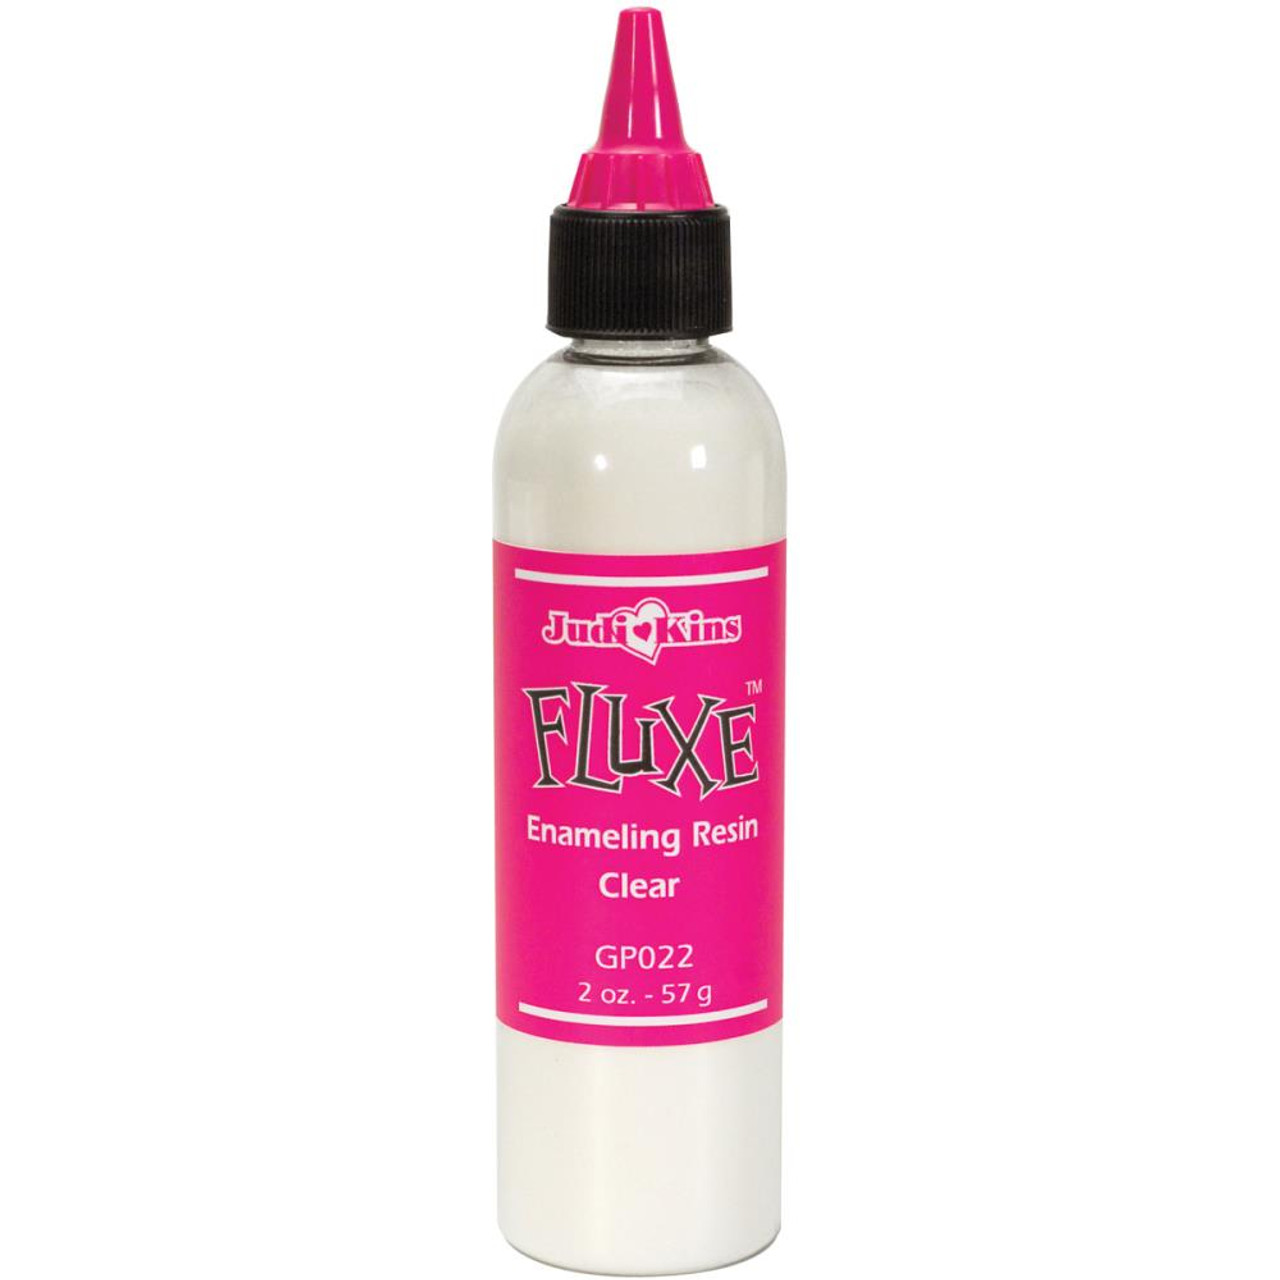 Twinkles Diamond Dust Glitter - Poly Clay Play